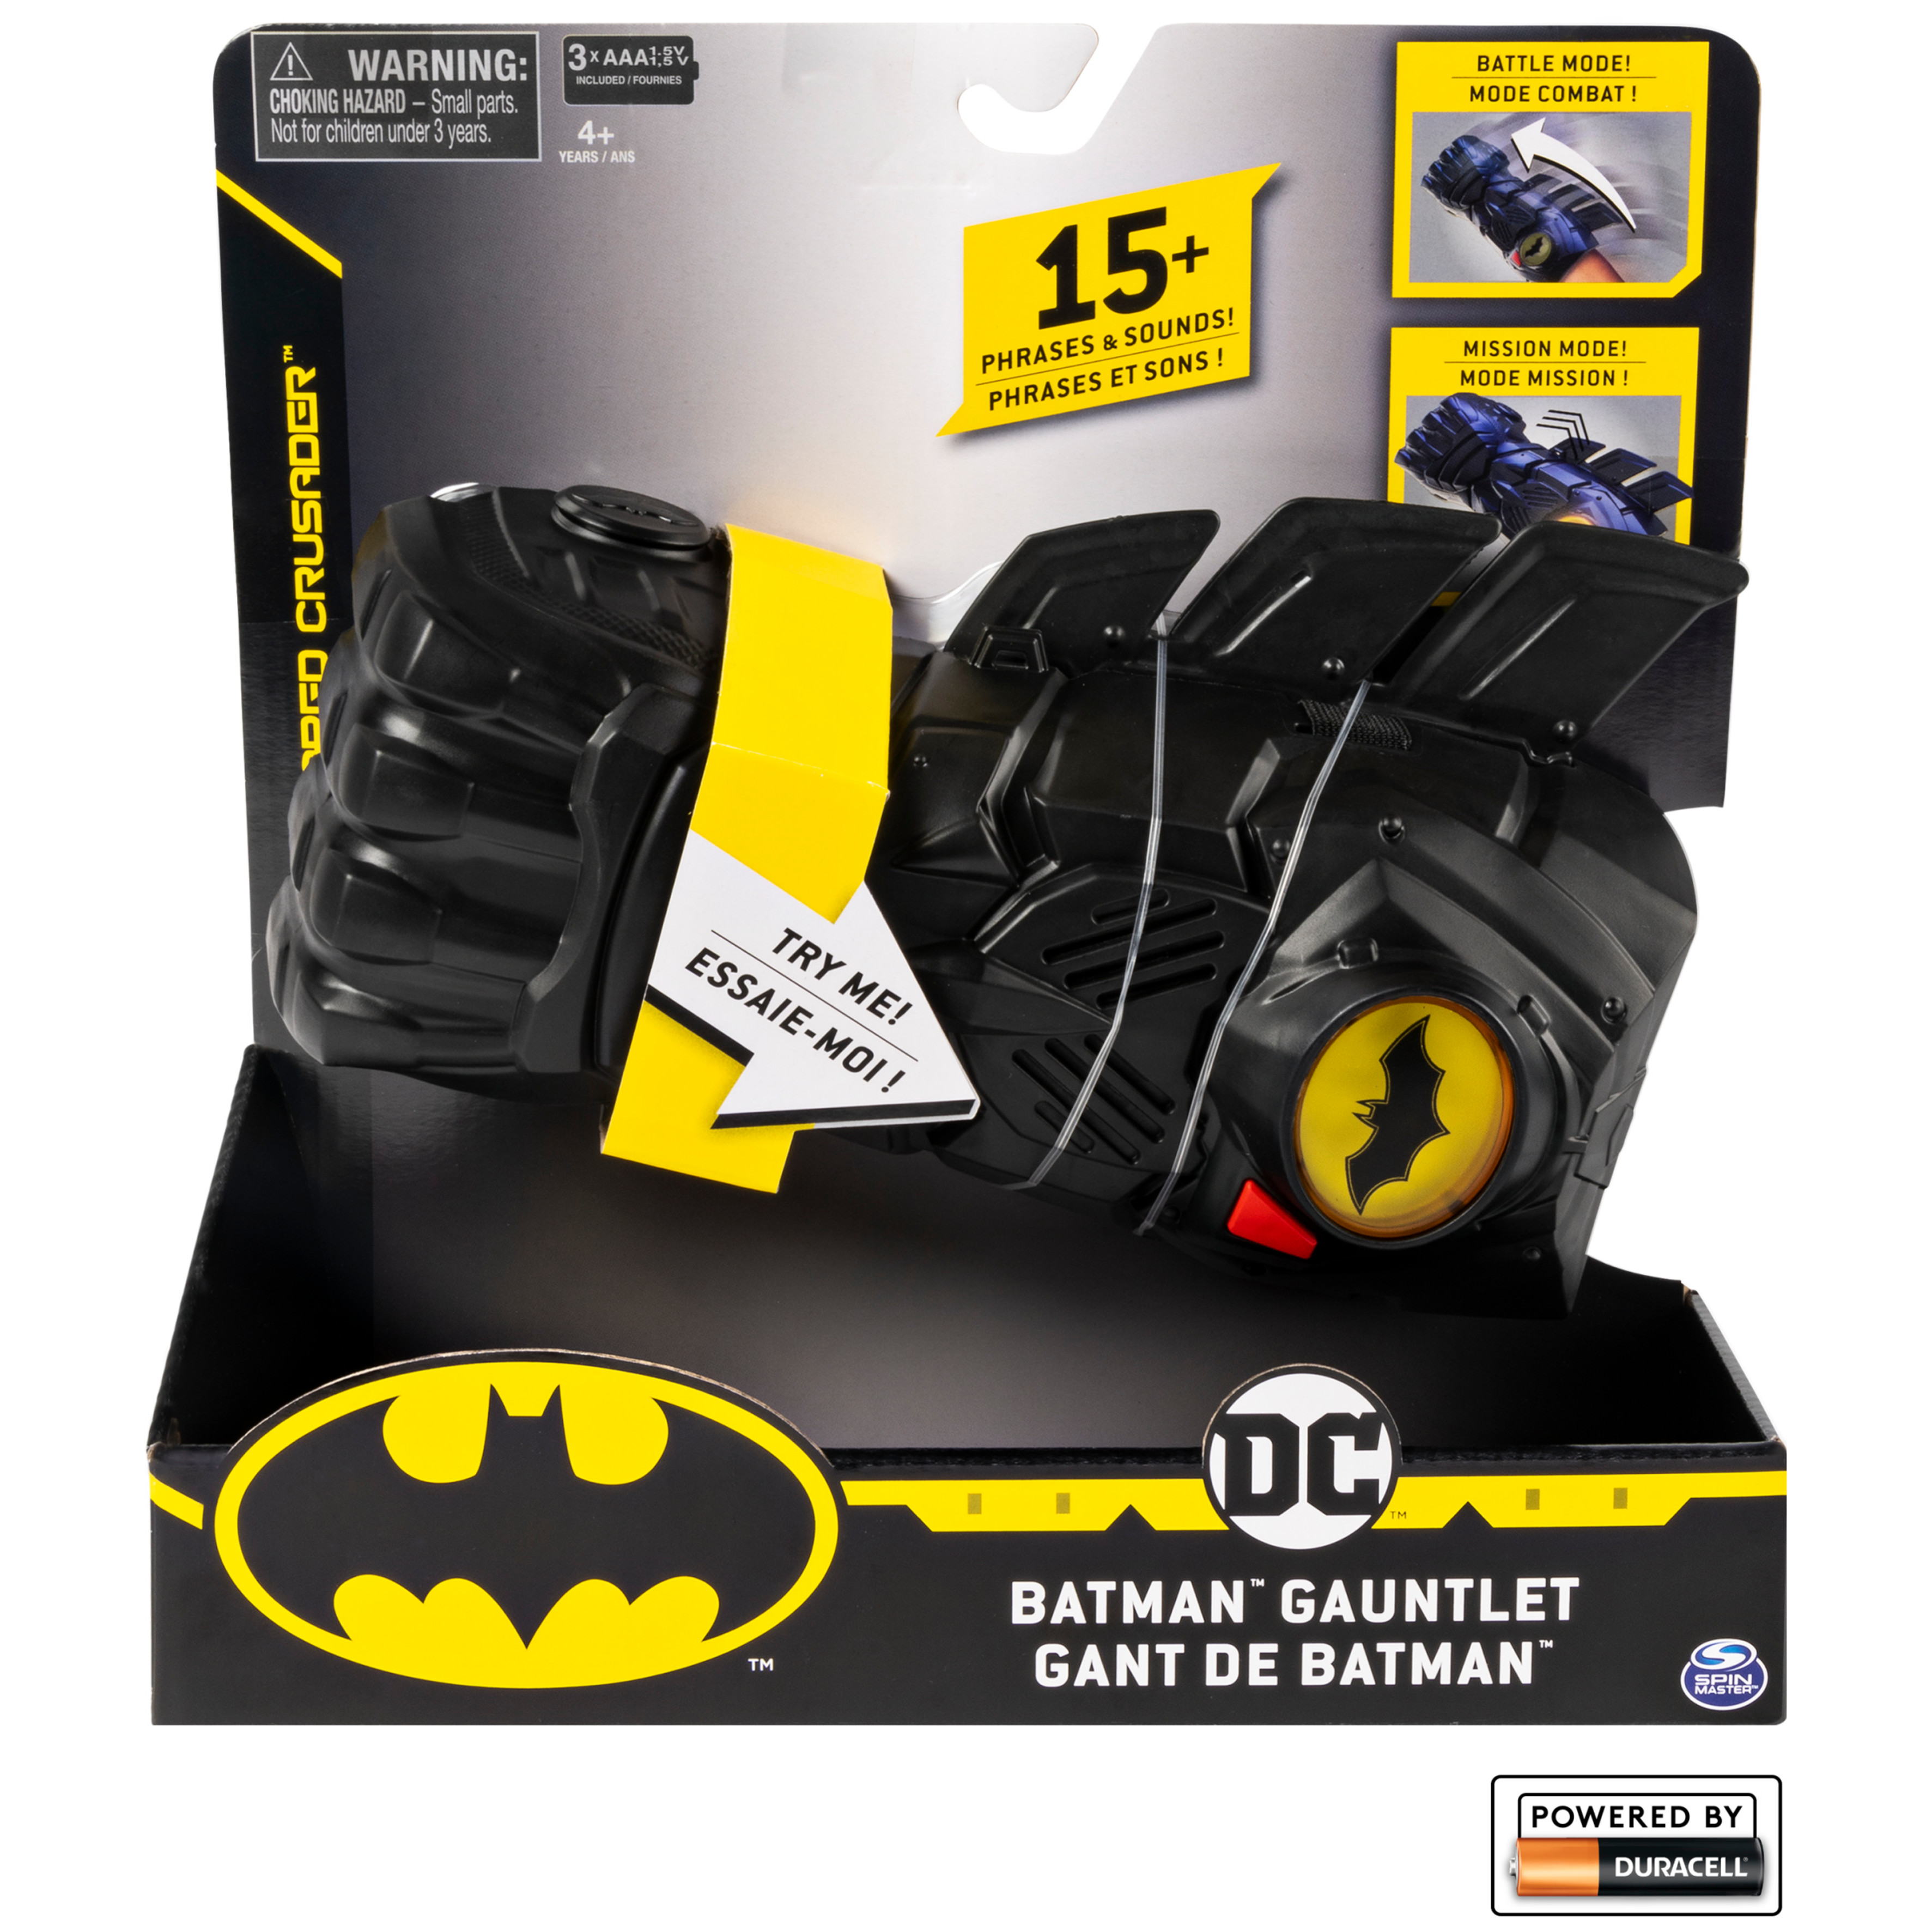 BATMAN, Interactive Gauntlet with Over 15 Phrases and Sounds, Kids Toys for Boys Aged 4 and Up - image 2 of 6